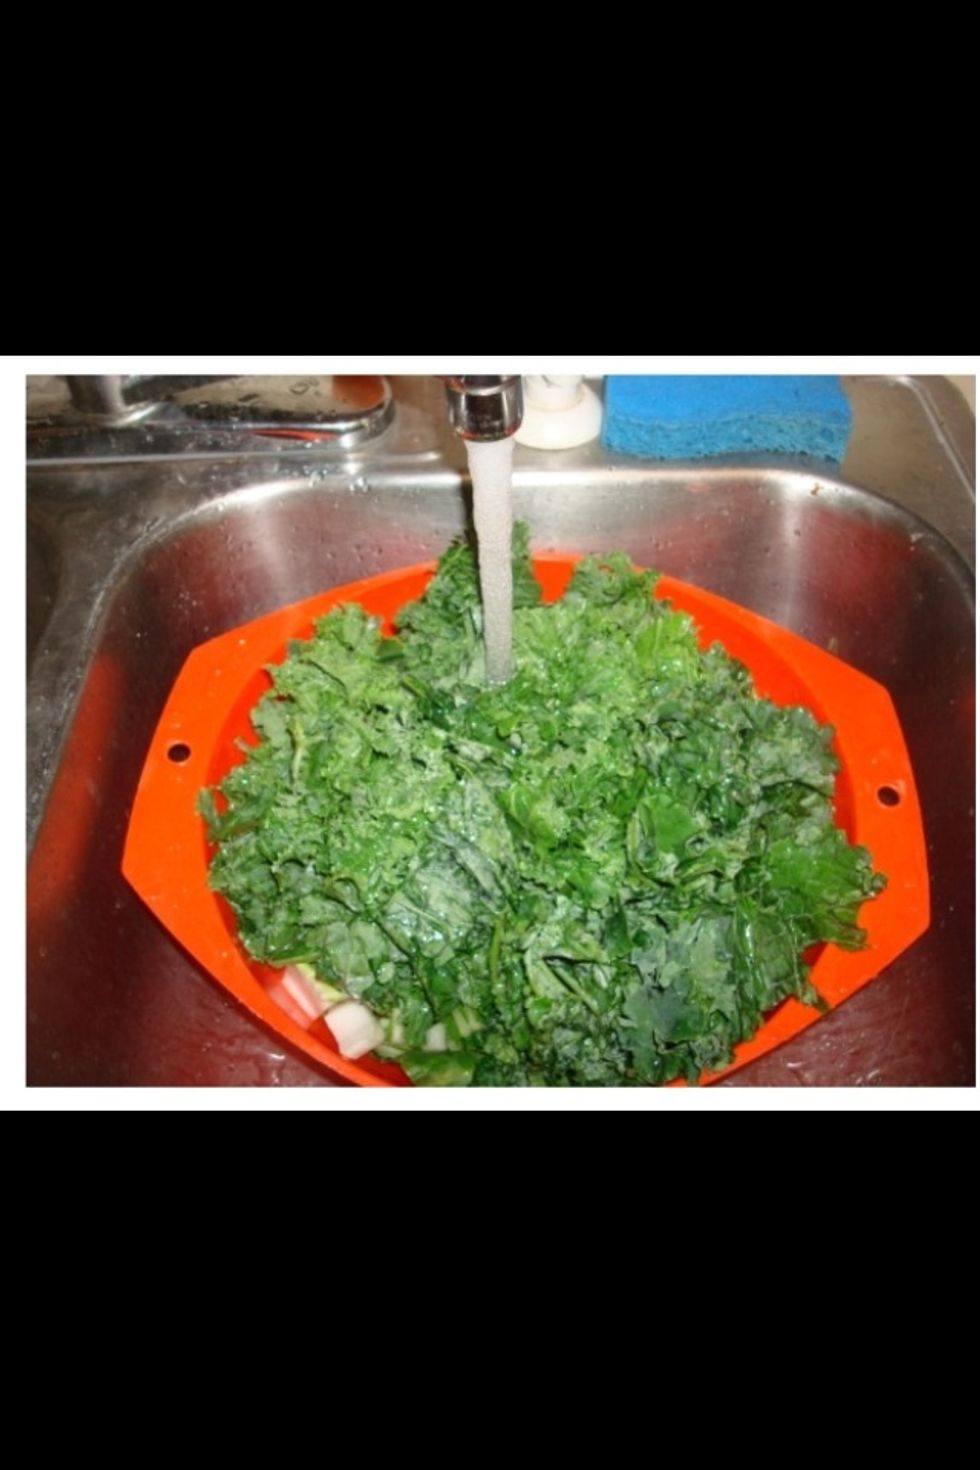 Give your greens a good rinse in a colander to ensure all dirt has been removed.